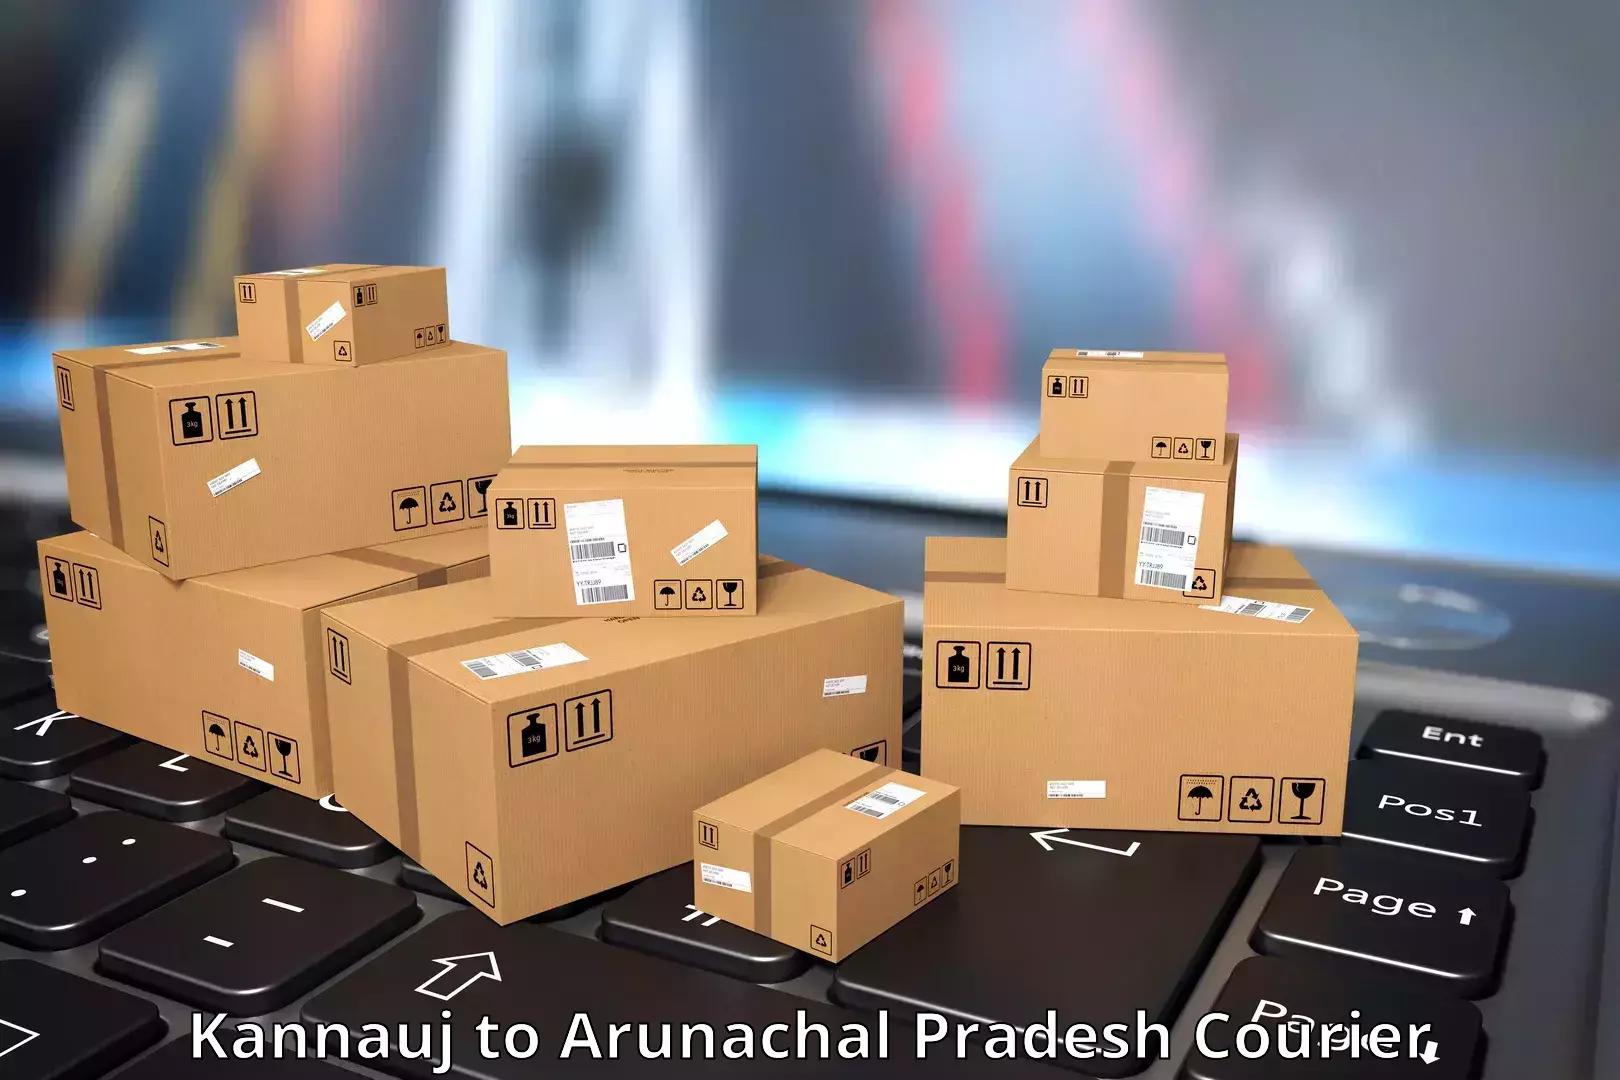 Courier service efficiency Kannauj to Roing